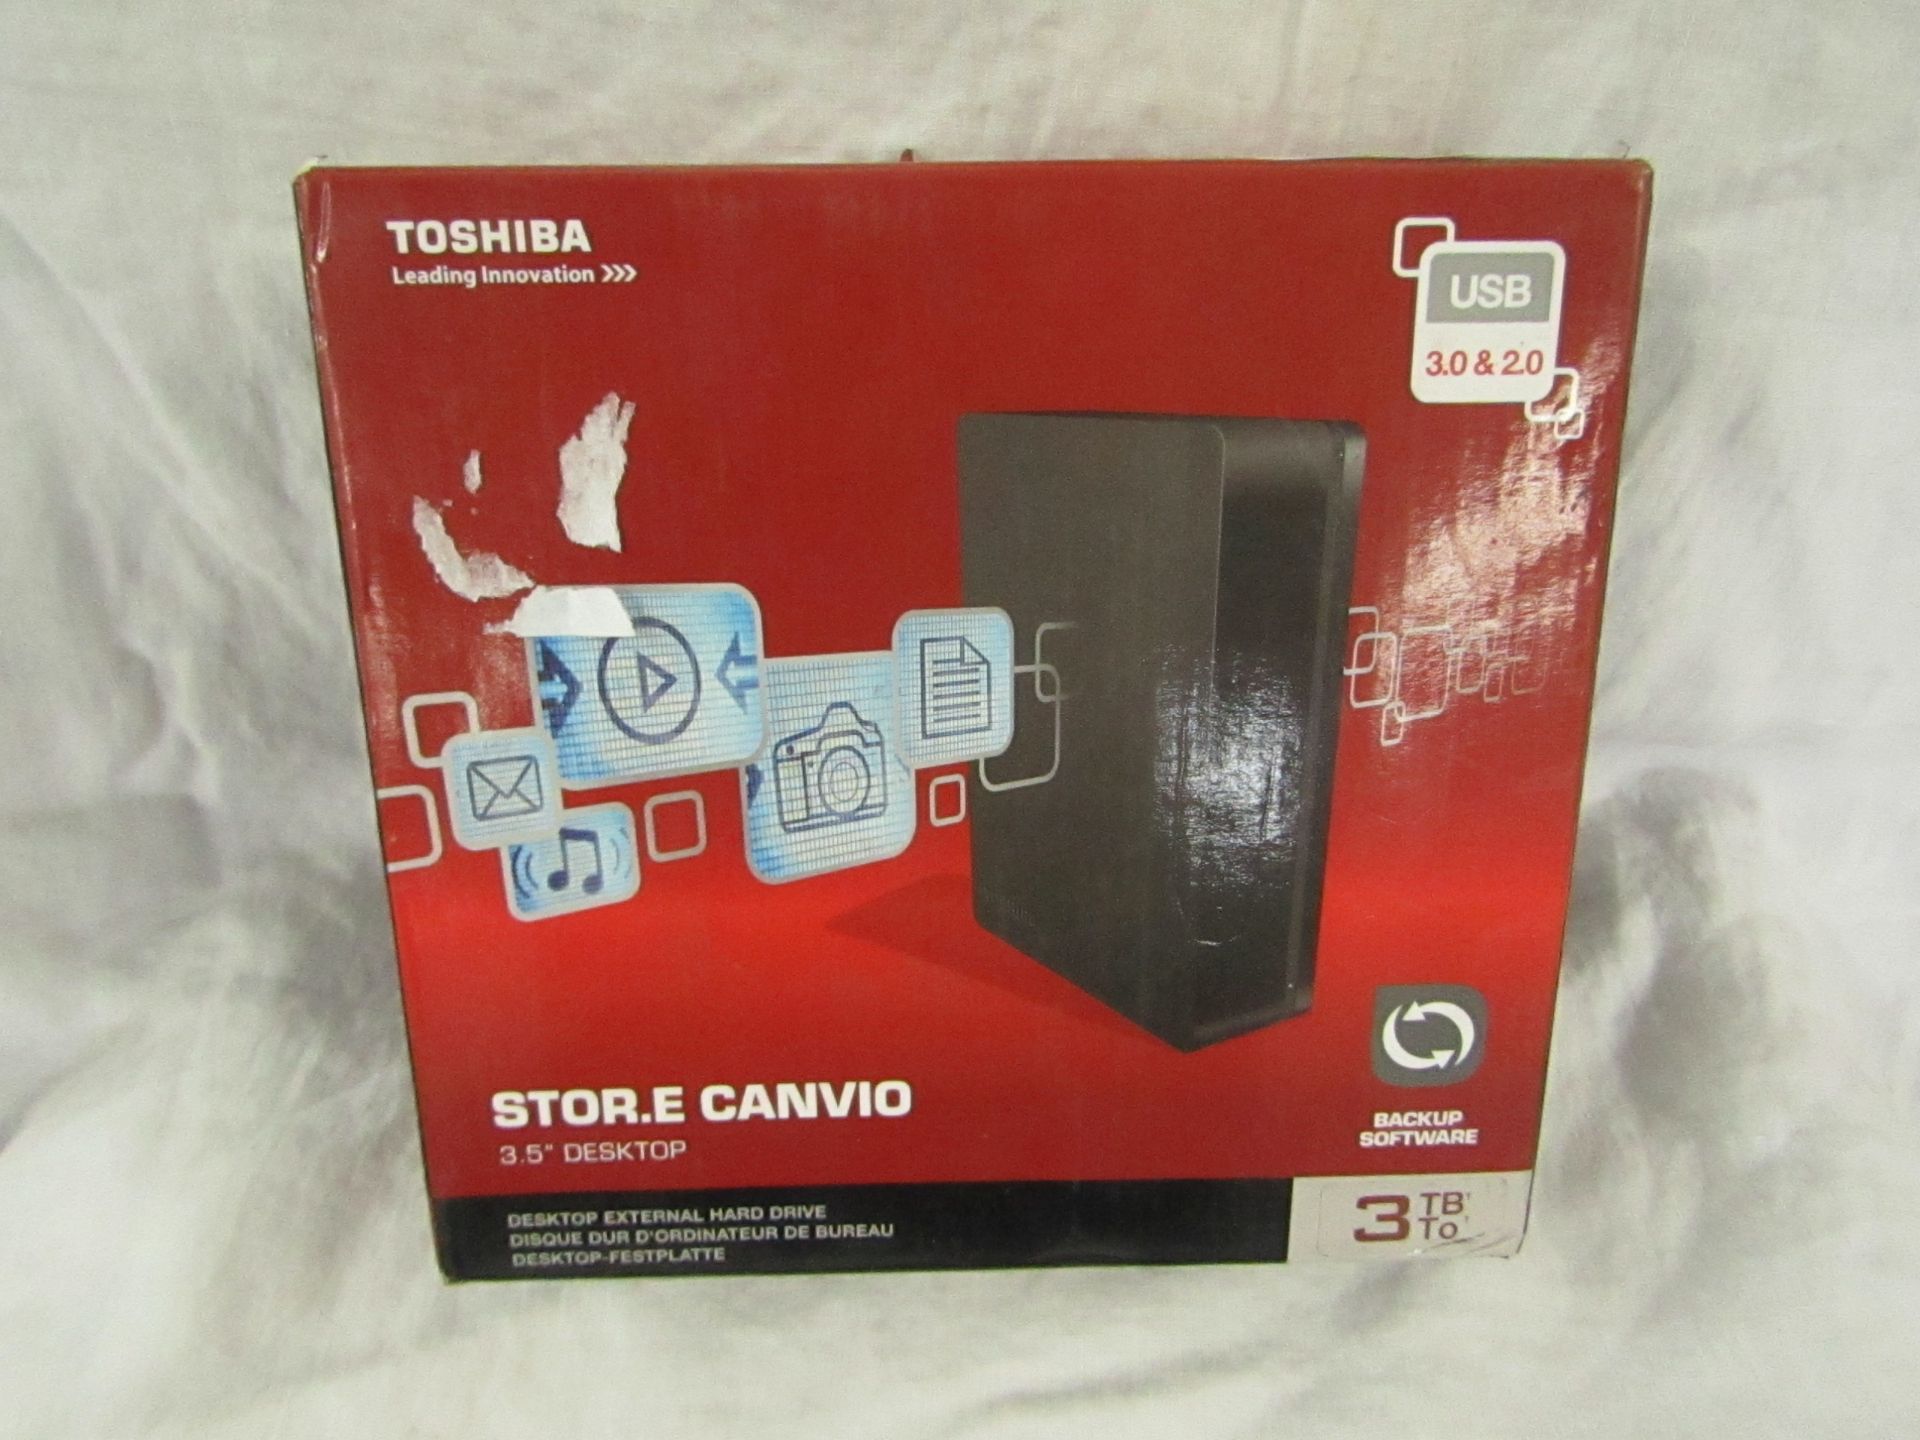 Toshiba Canvio USB 3.0- 3TB Desktop Hard Drive, Unable To Test This Item, Comes In Original Box, RRP